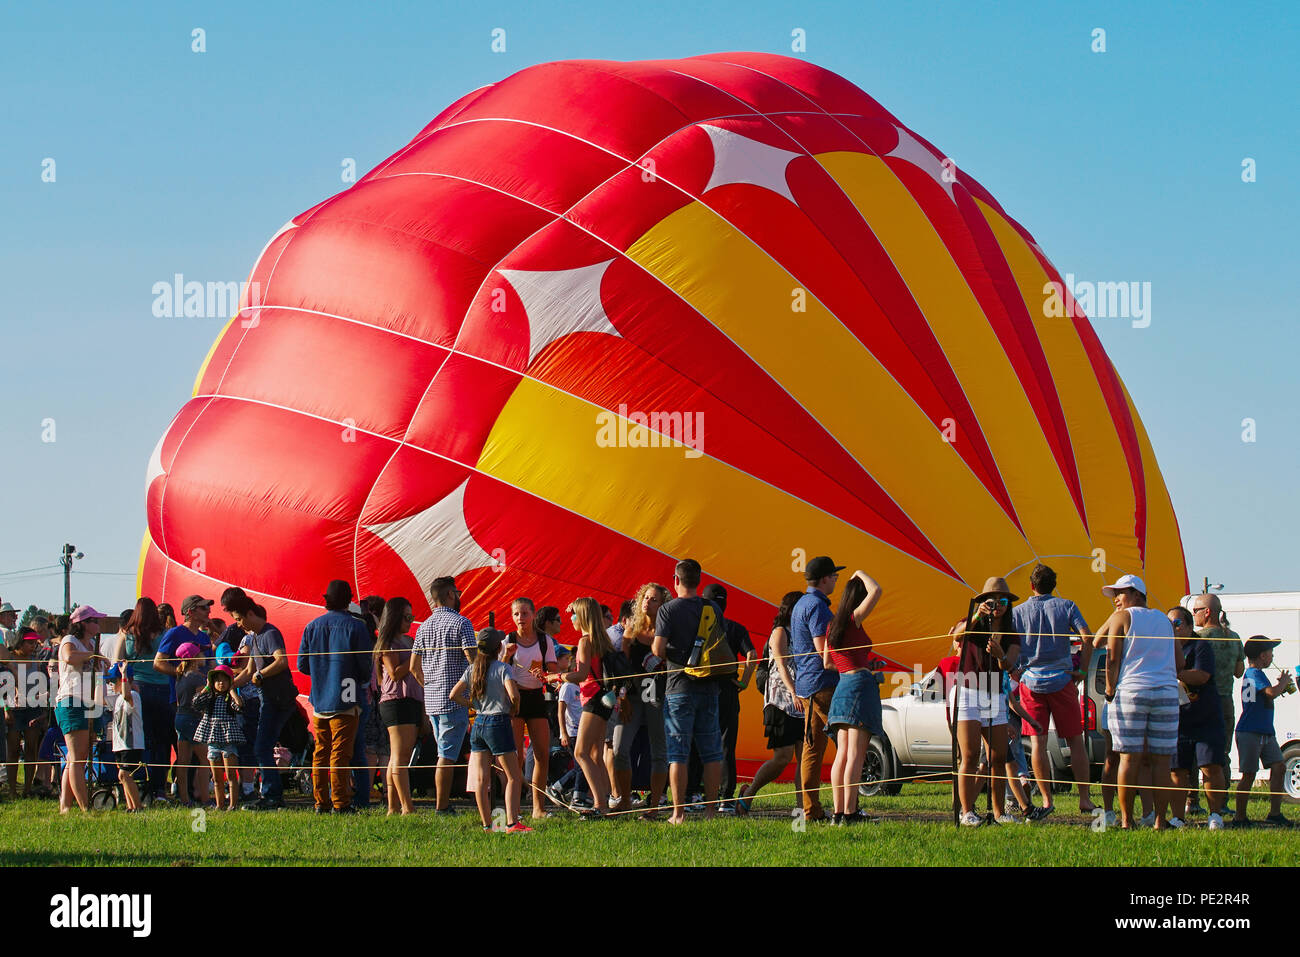 St-Jean-sur-Richelieu,Canada,11 August, 2018. Crowd of people watching  hot-air balloons being inflated.Credit:Mario Beauregard/Alamy Live News  Stock Photo - Alamy